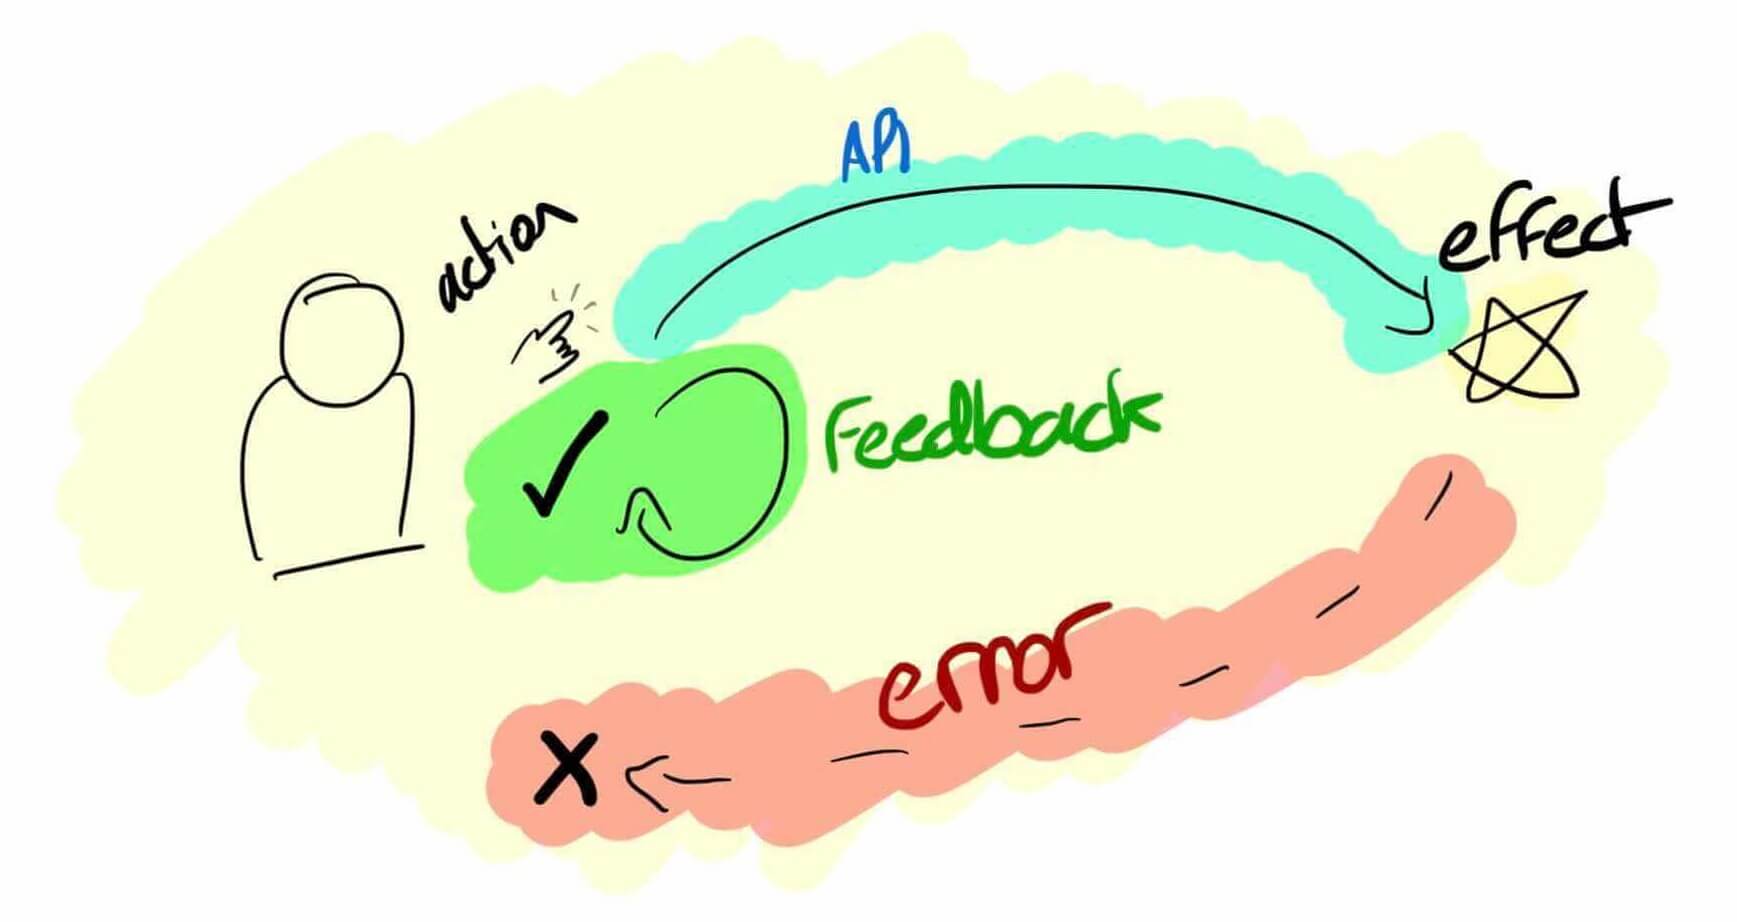 hand drawn image of a close feedback loop to user action